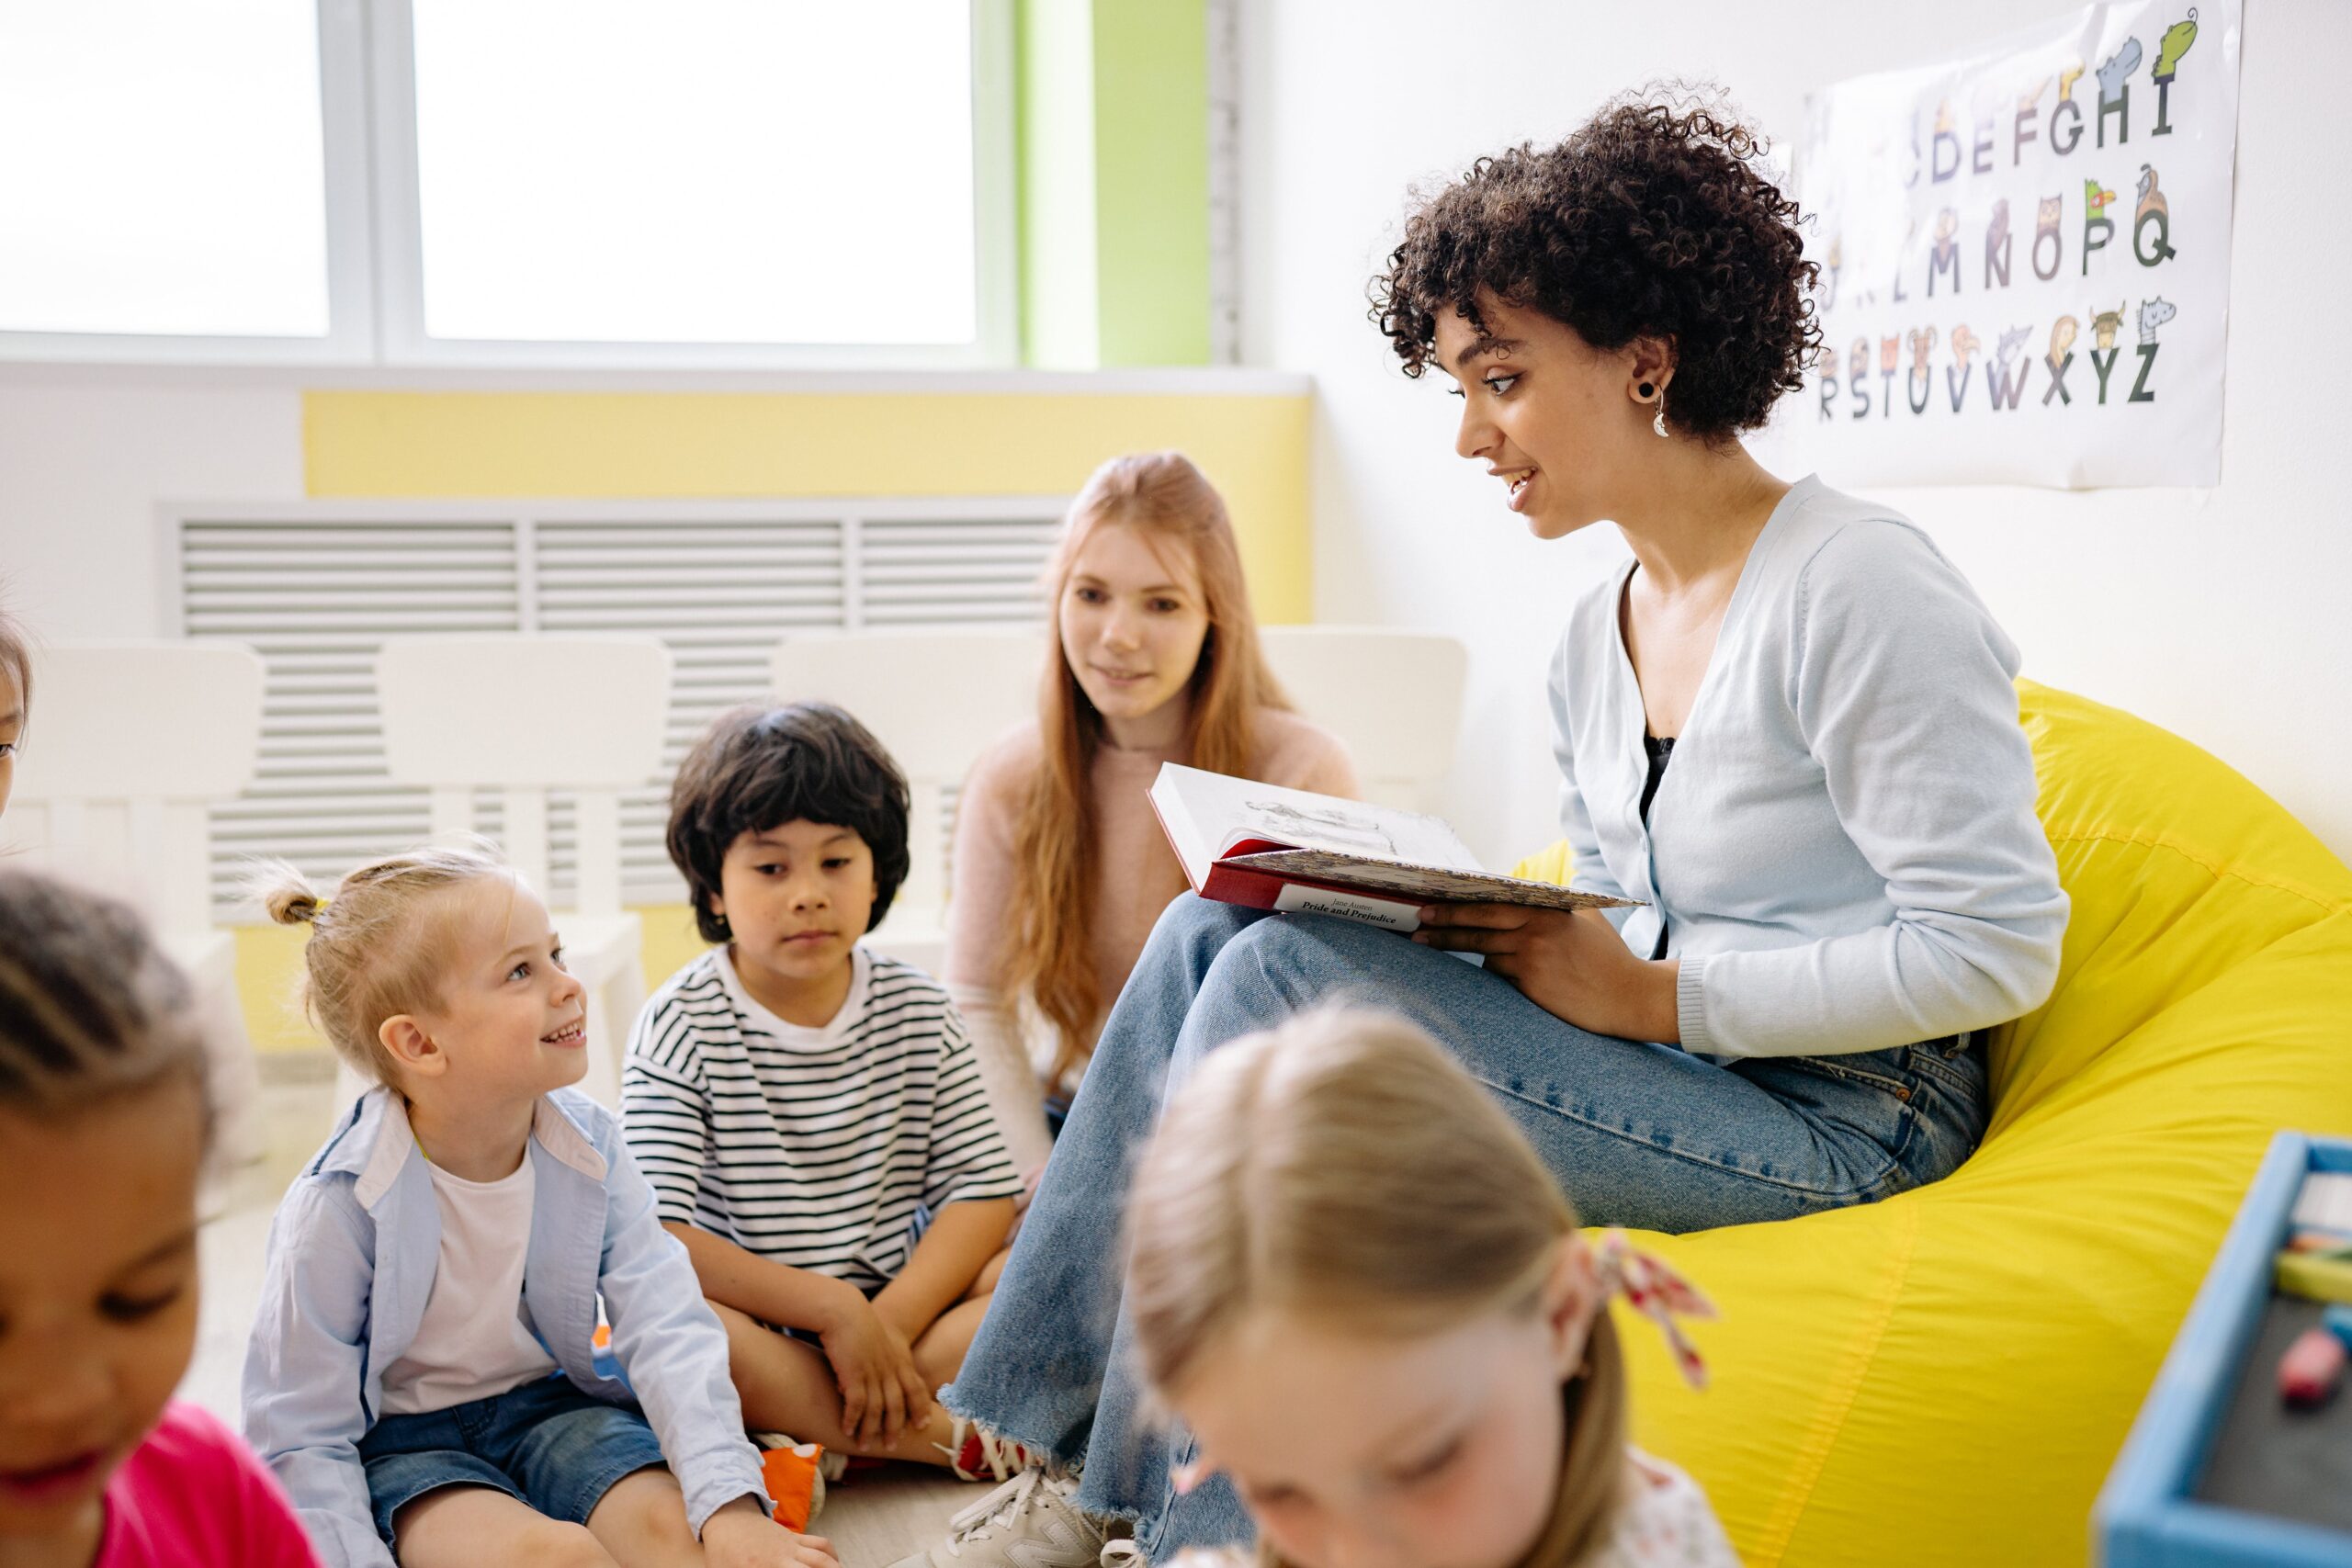 Woman Reading A Book To The Children